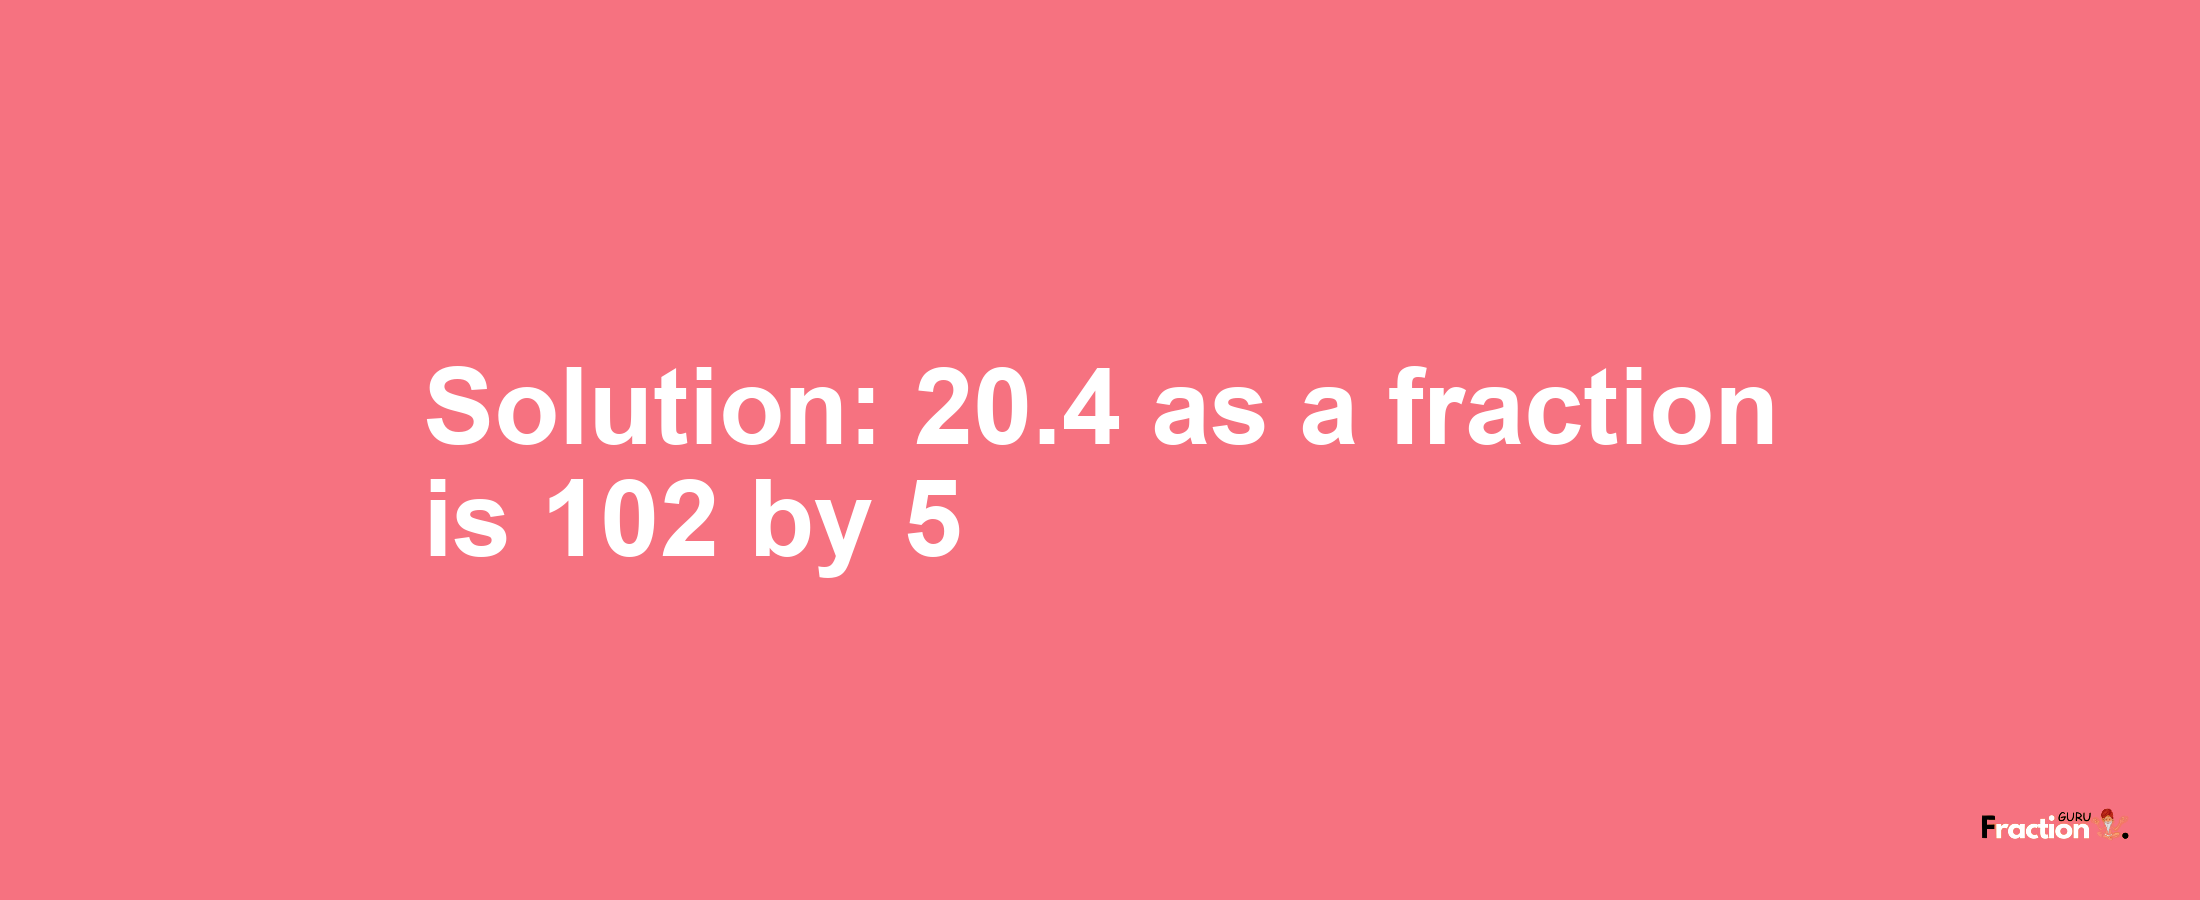 Solution:20.4 as a fraction is 102/5